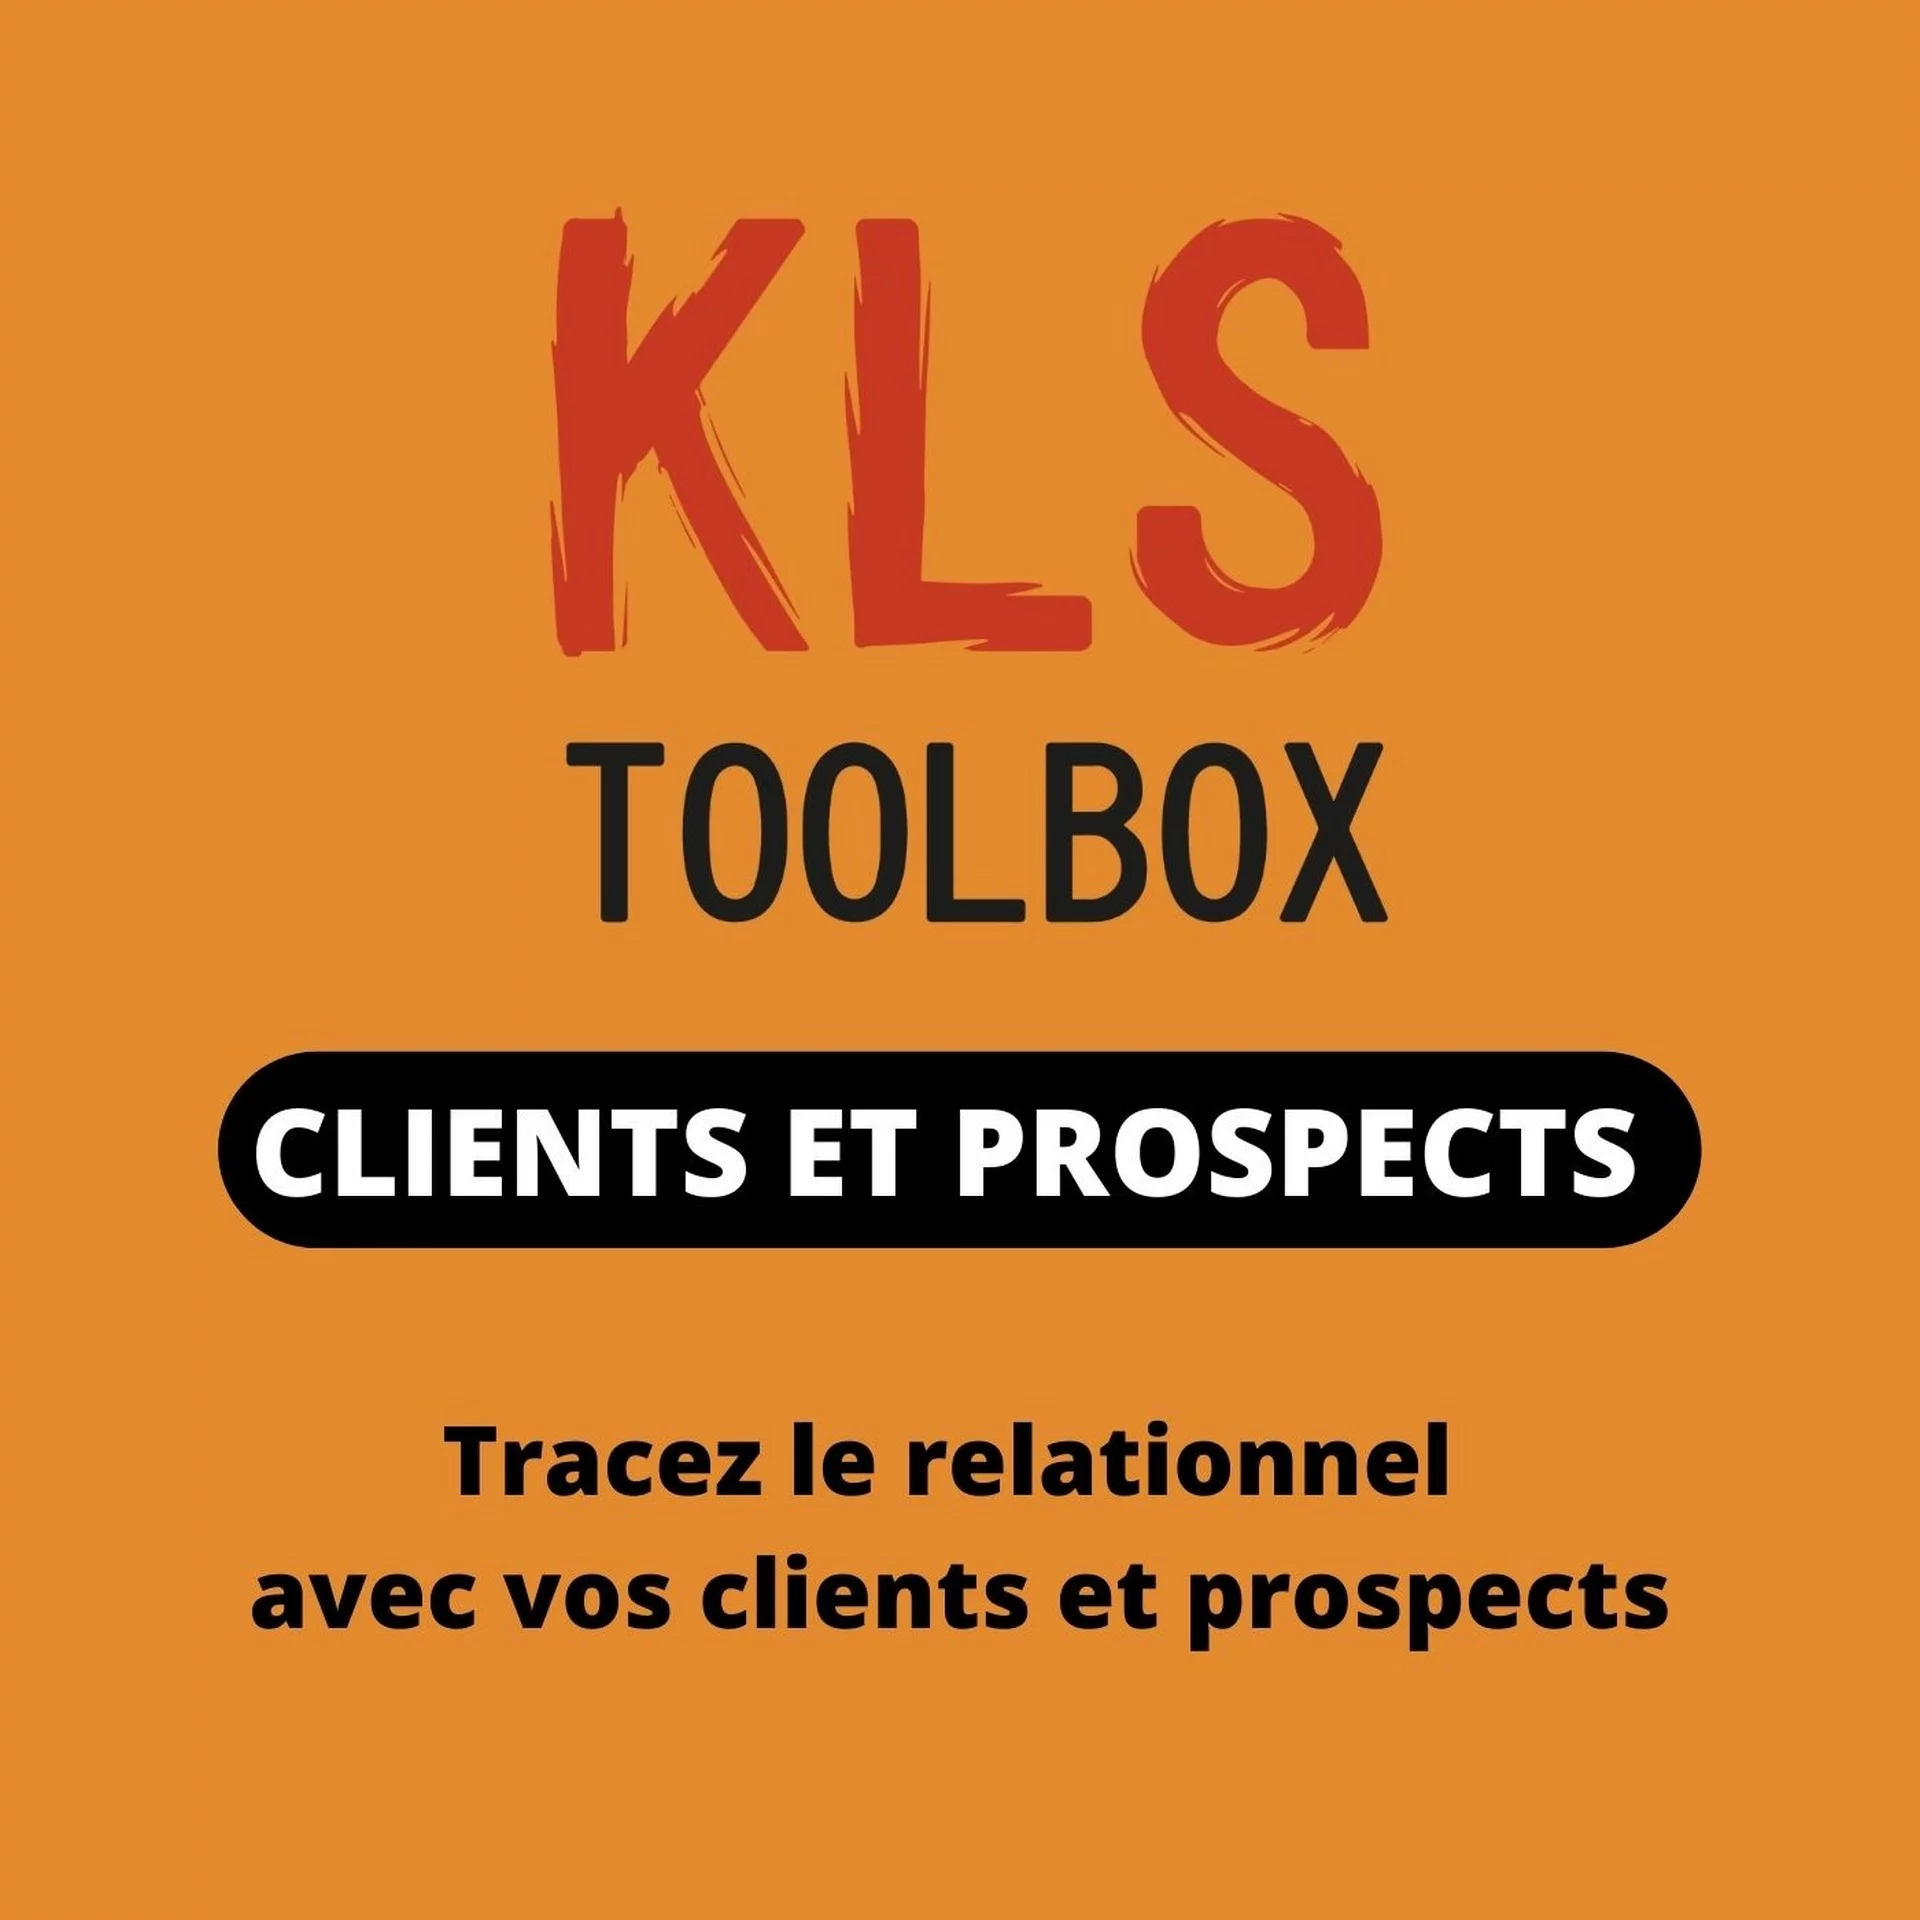 xtep kls toolbox customer and prospect follow-up